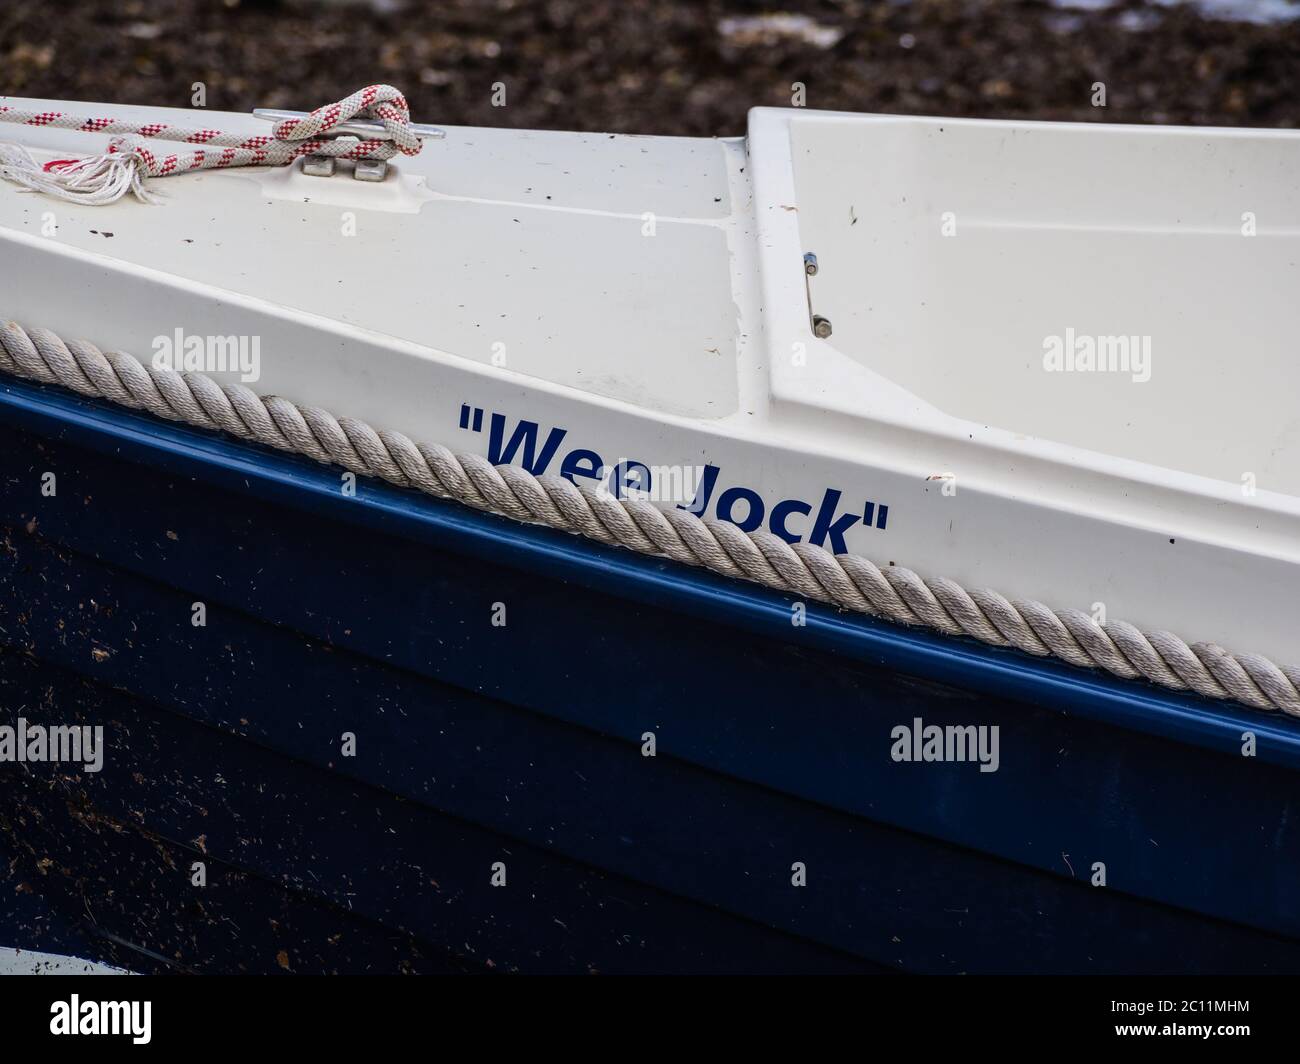 'Wee Jock' , name on side of a small motorboat Stock Photo